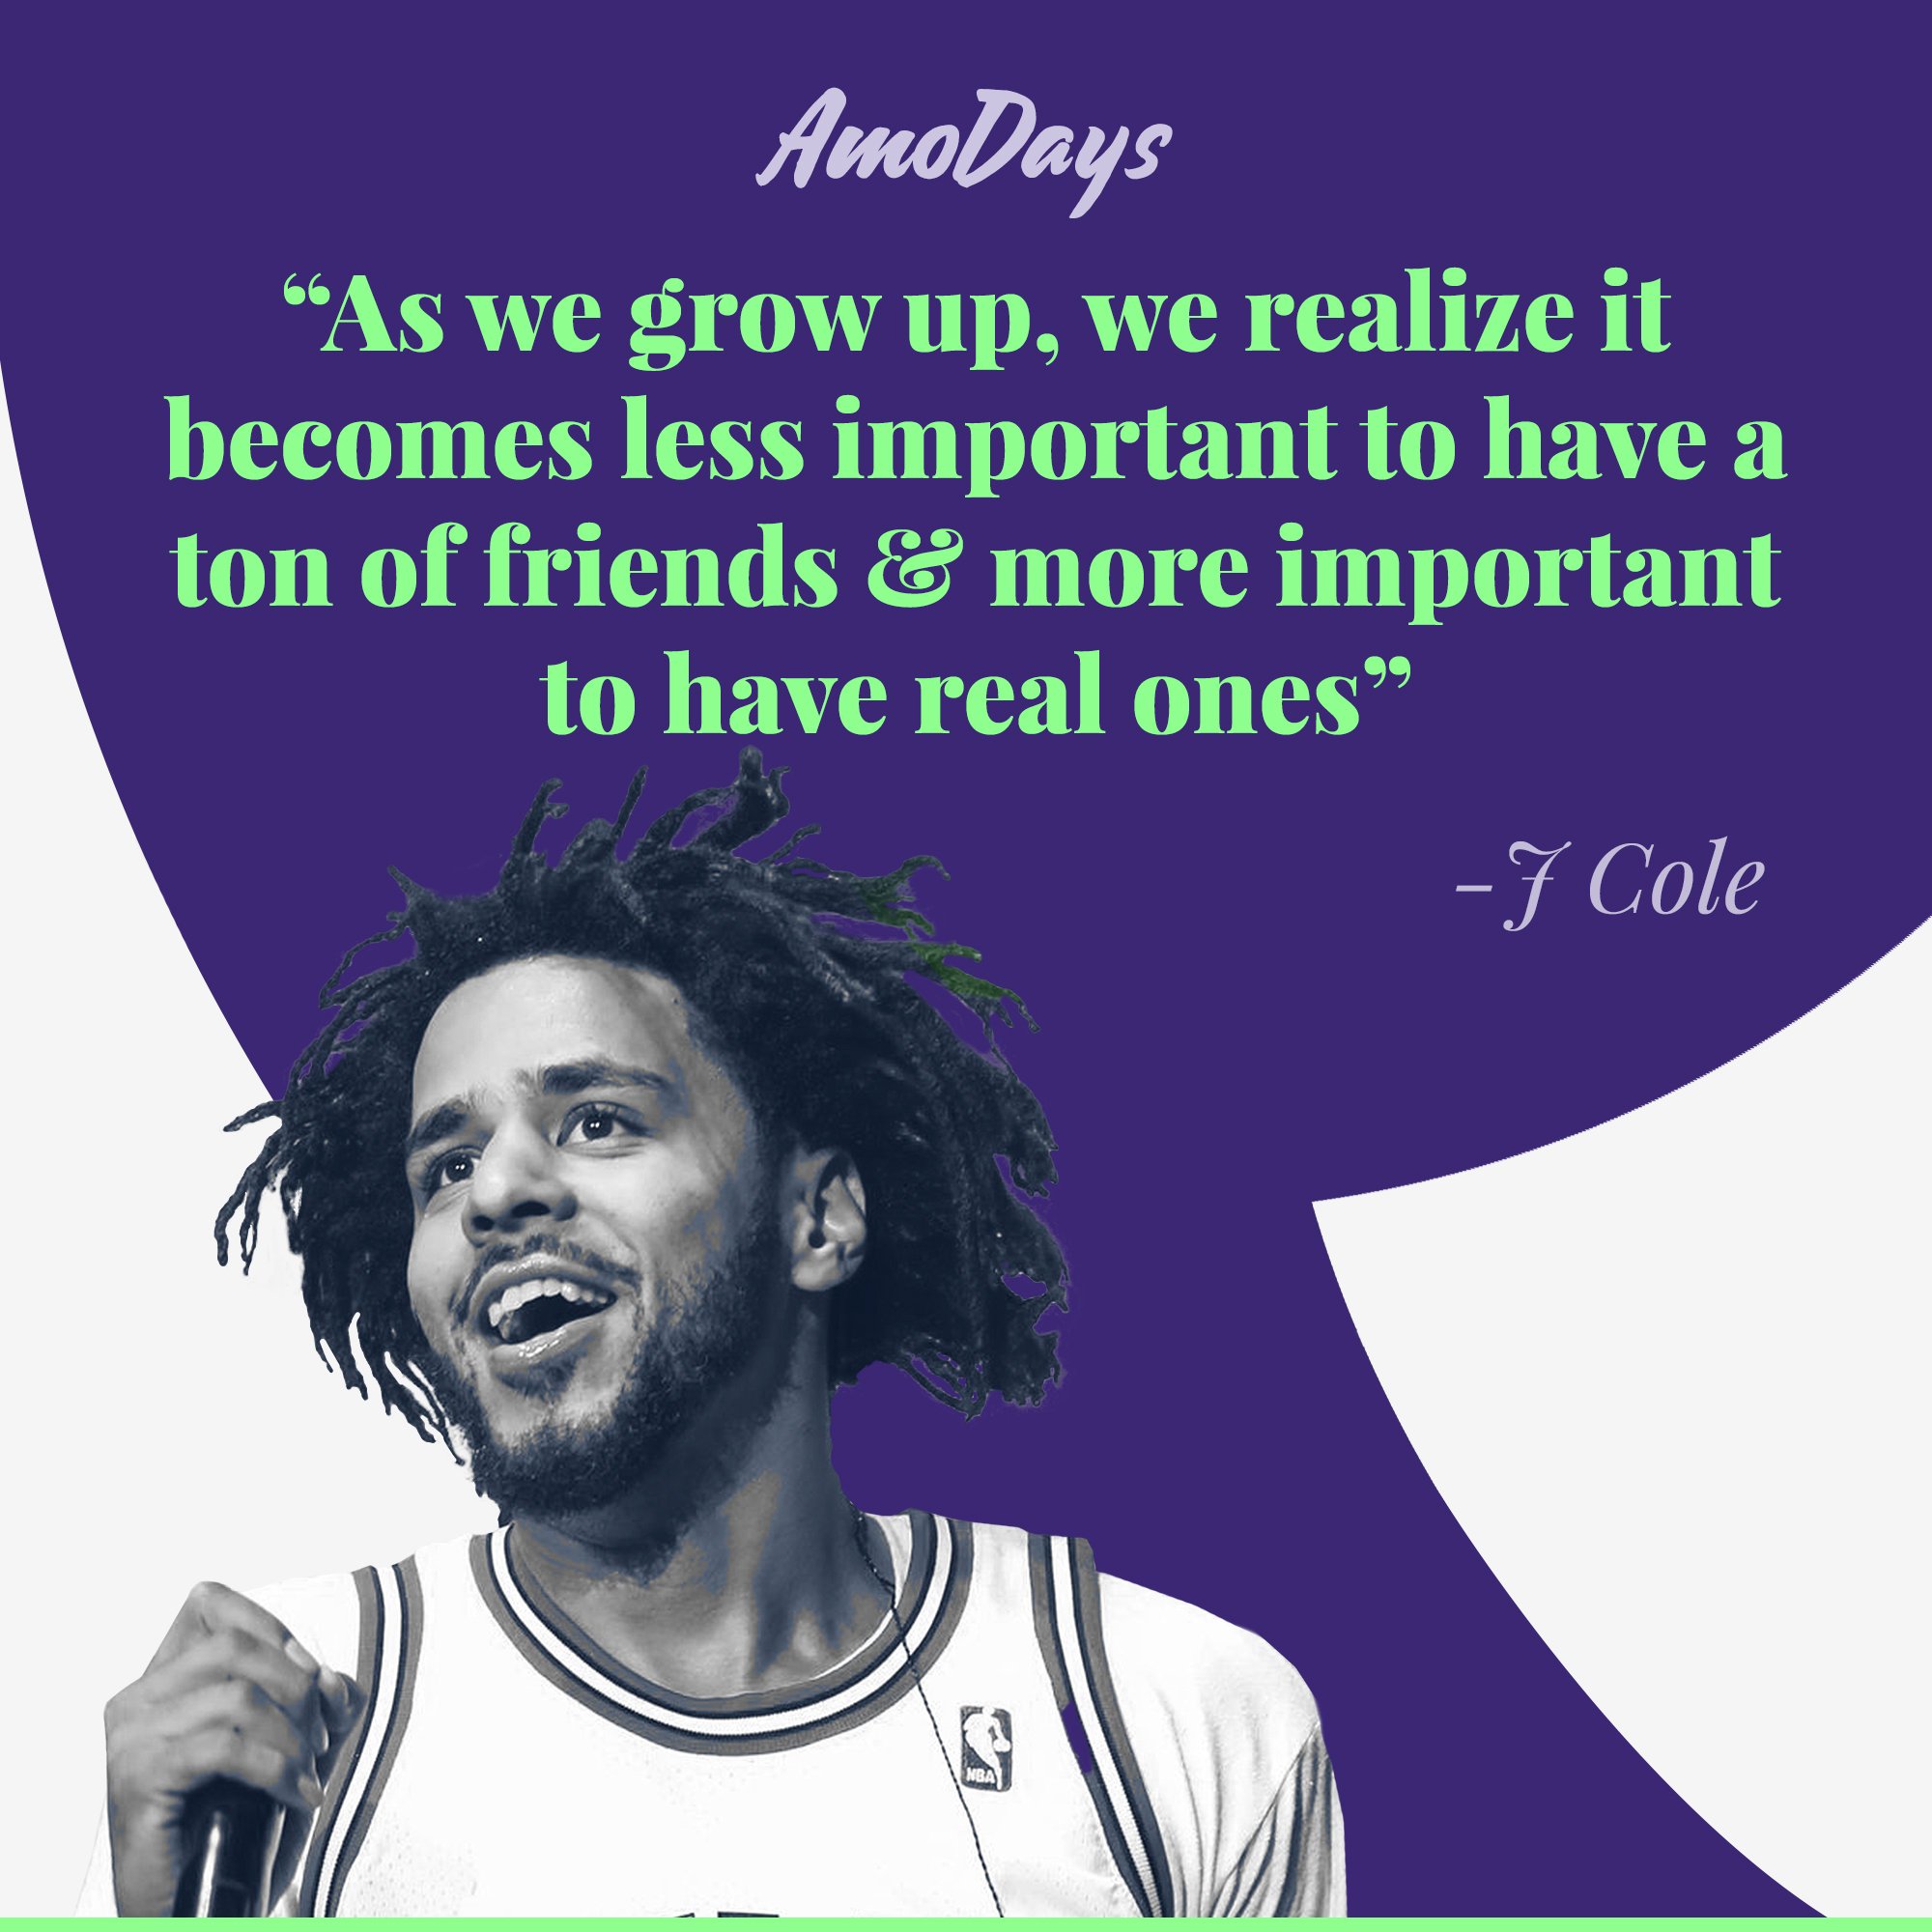 J Cole's quote: “As we grow up, we realize it becomes less important to have a ton of friends & more important to have real ones.” | Image: AmoDays